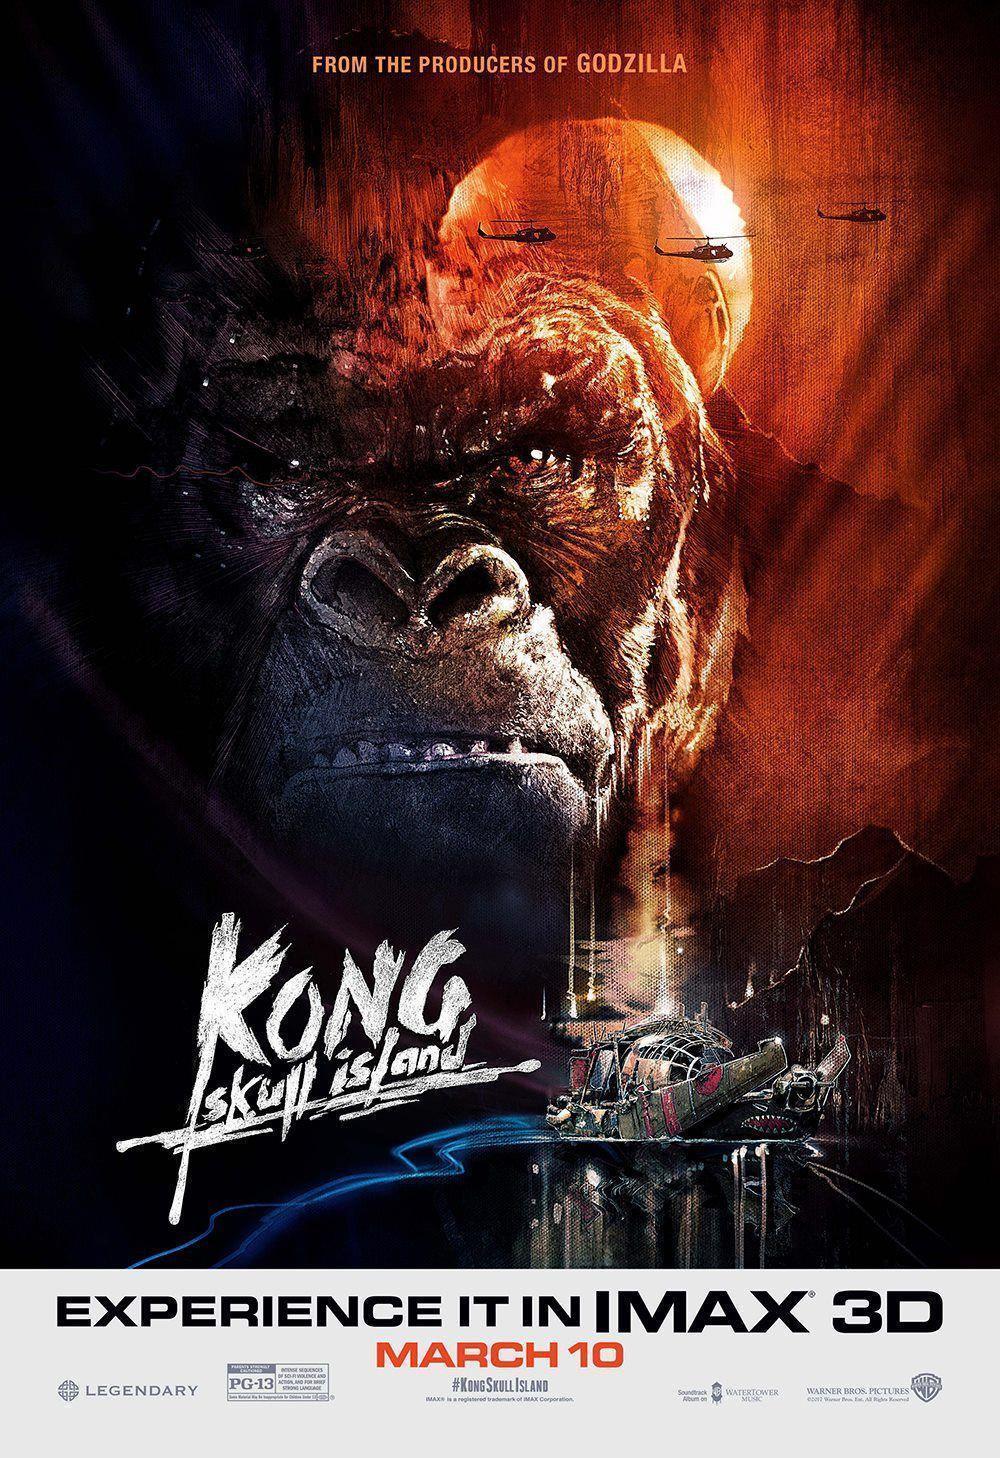 All Movie Posters and Prints for Kong: Skull Island